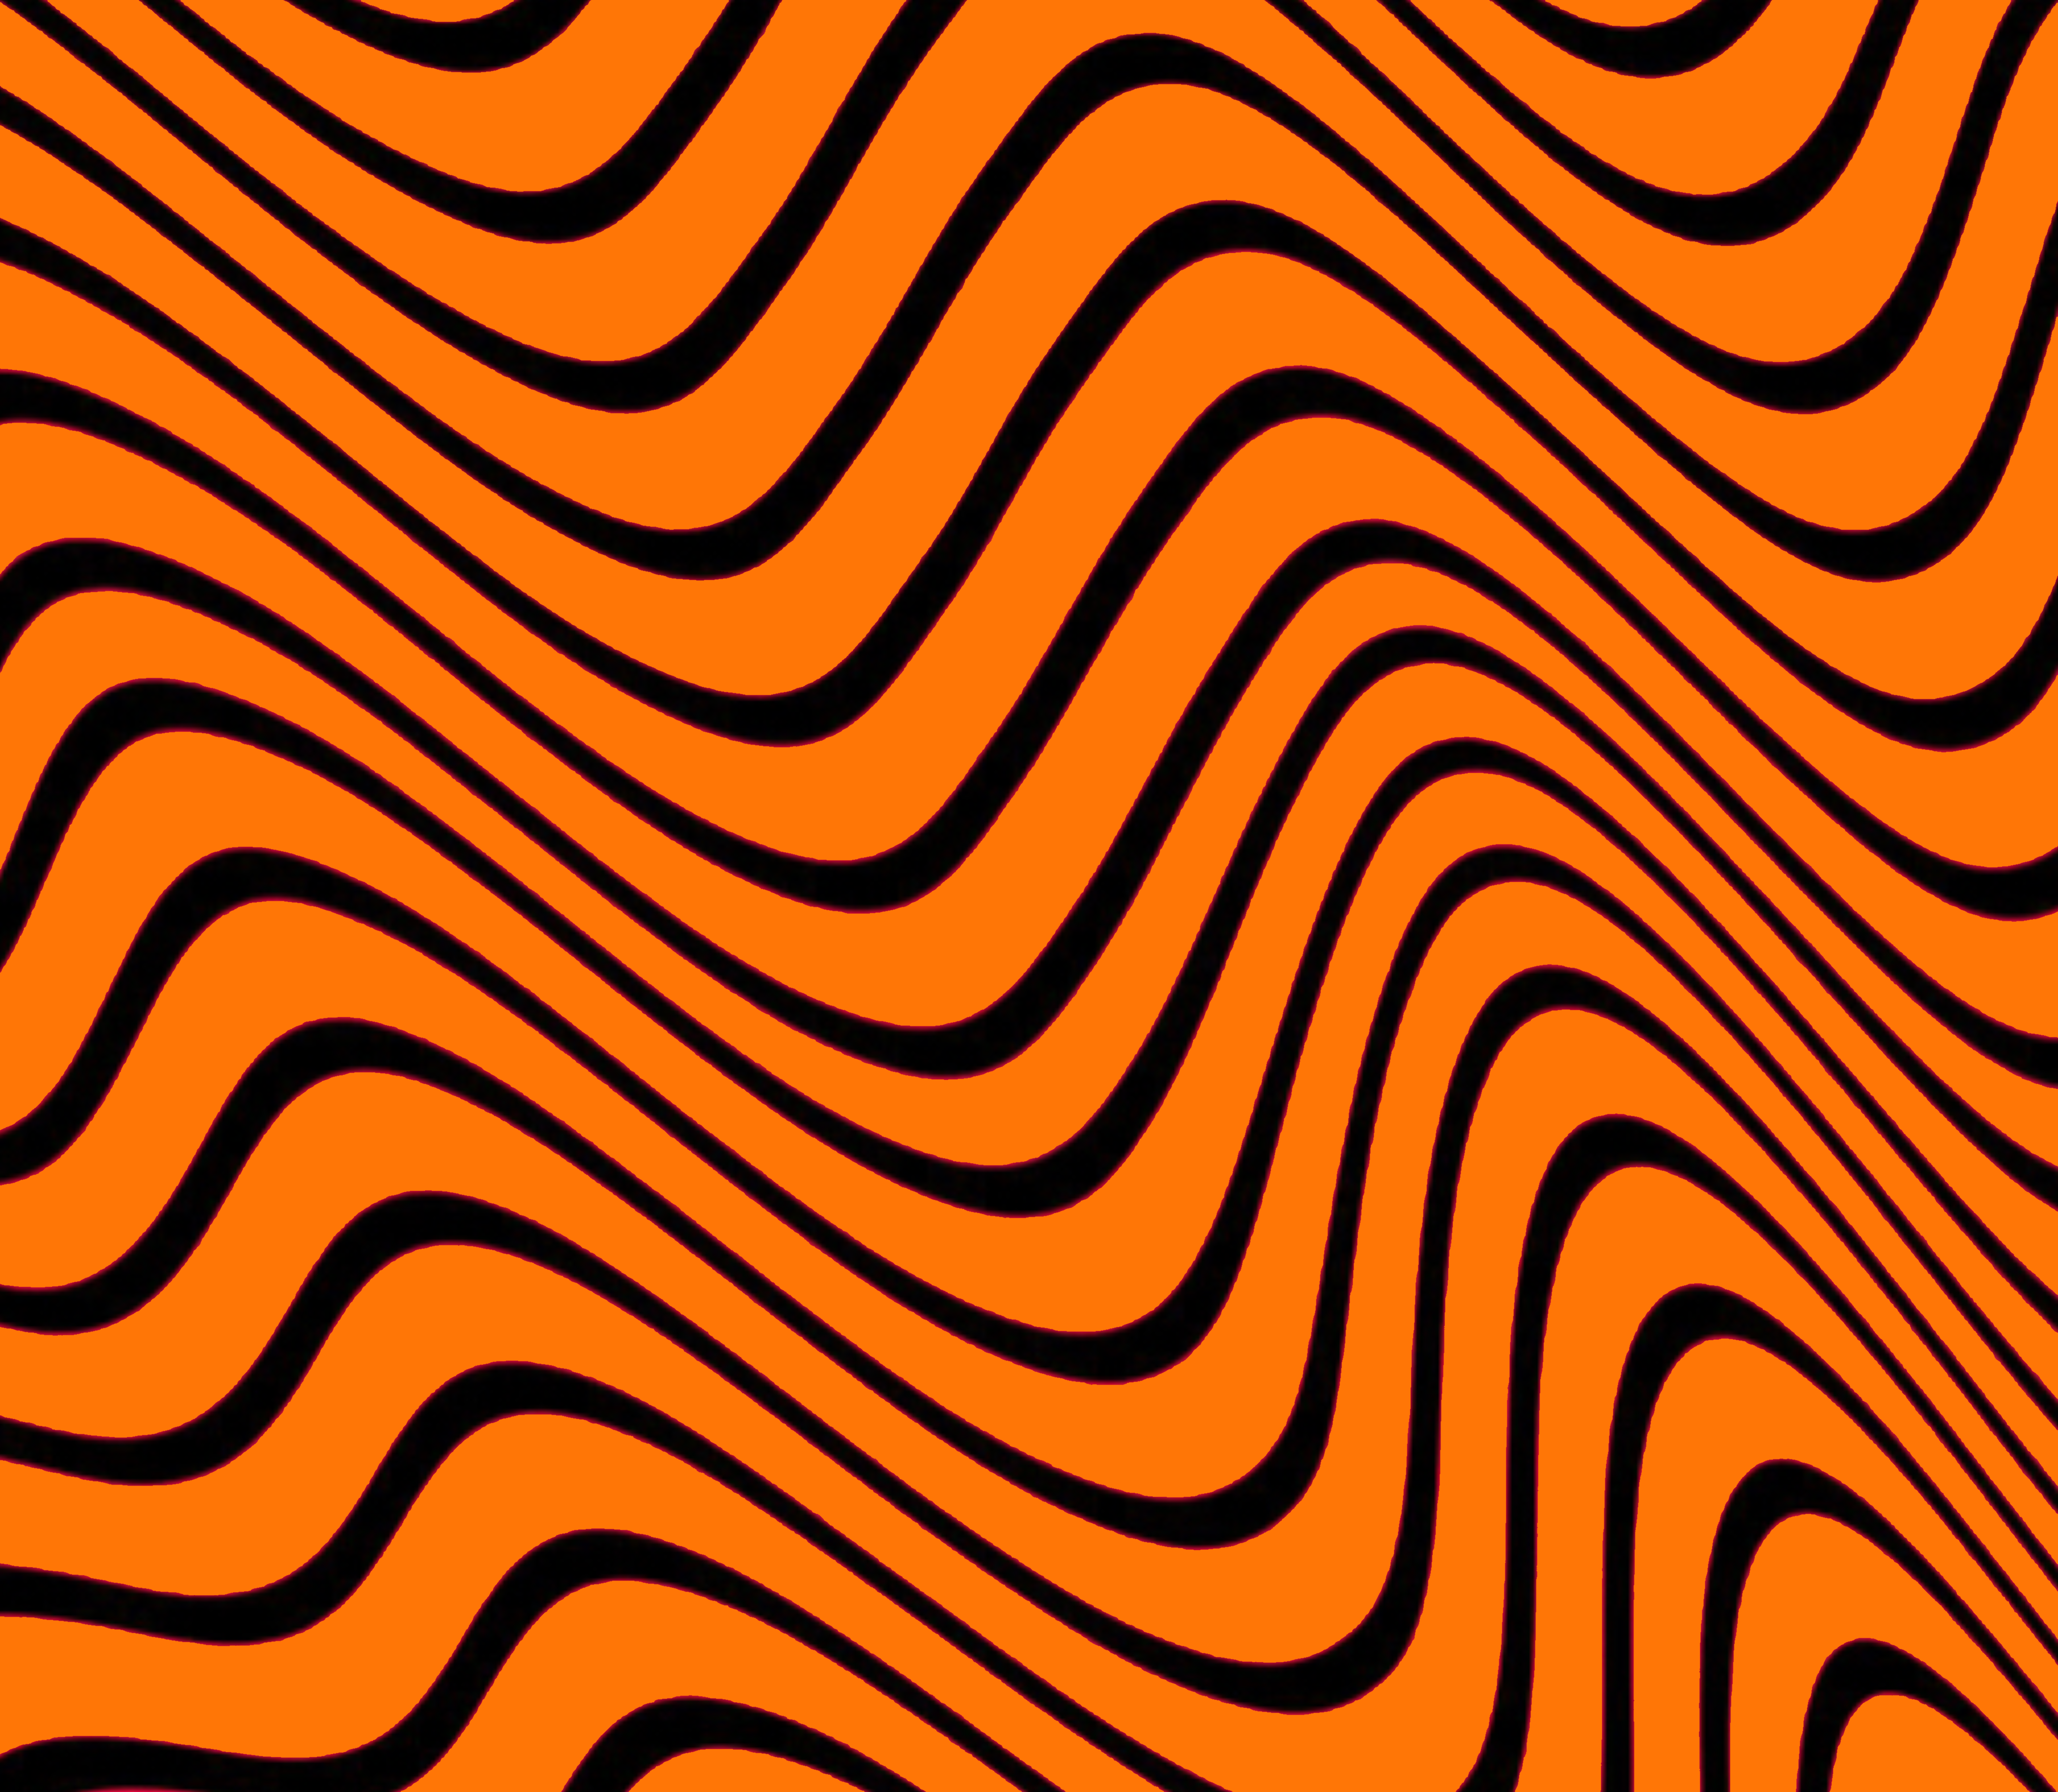 A spoopy pewdiepie wave for those who wanna have spoopy wallpaper